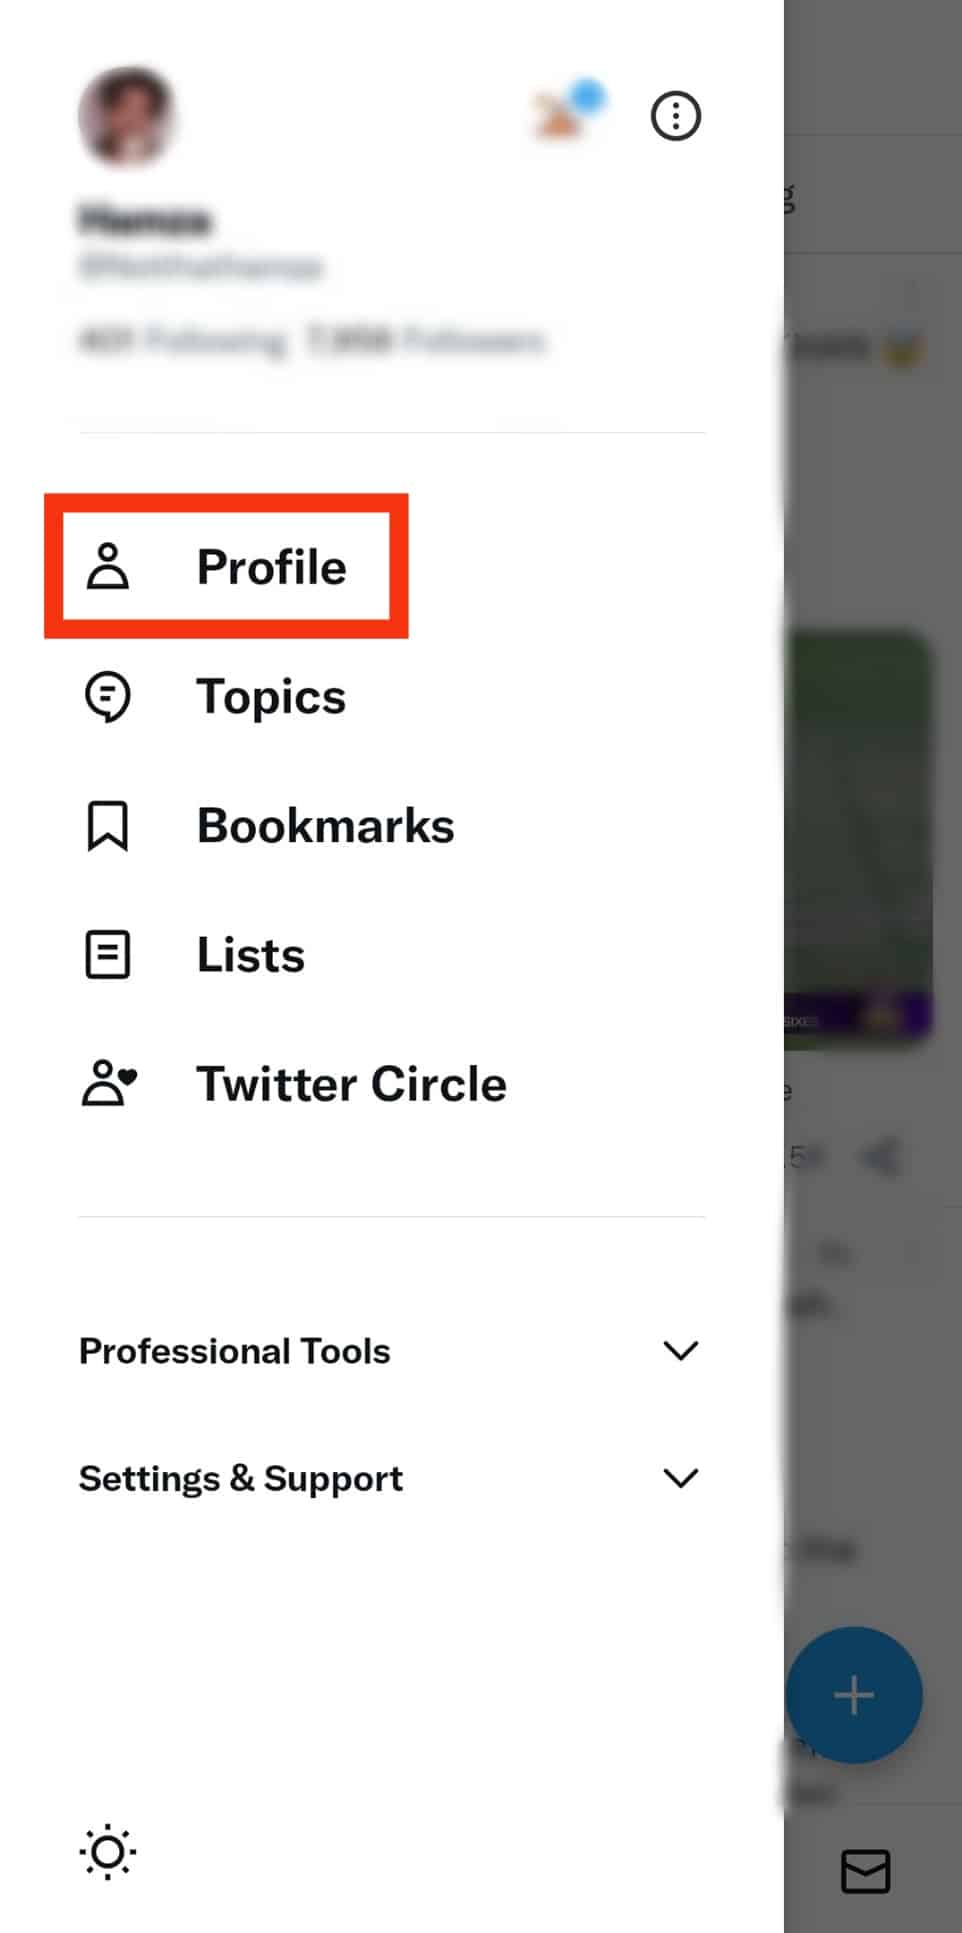 Select Profile From The Menu